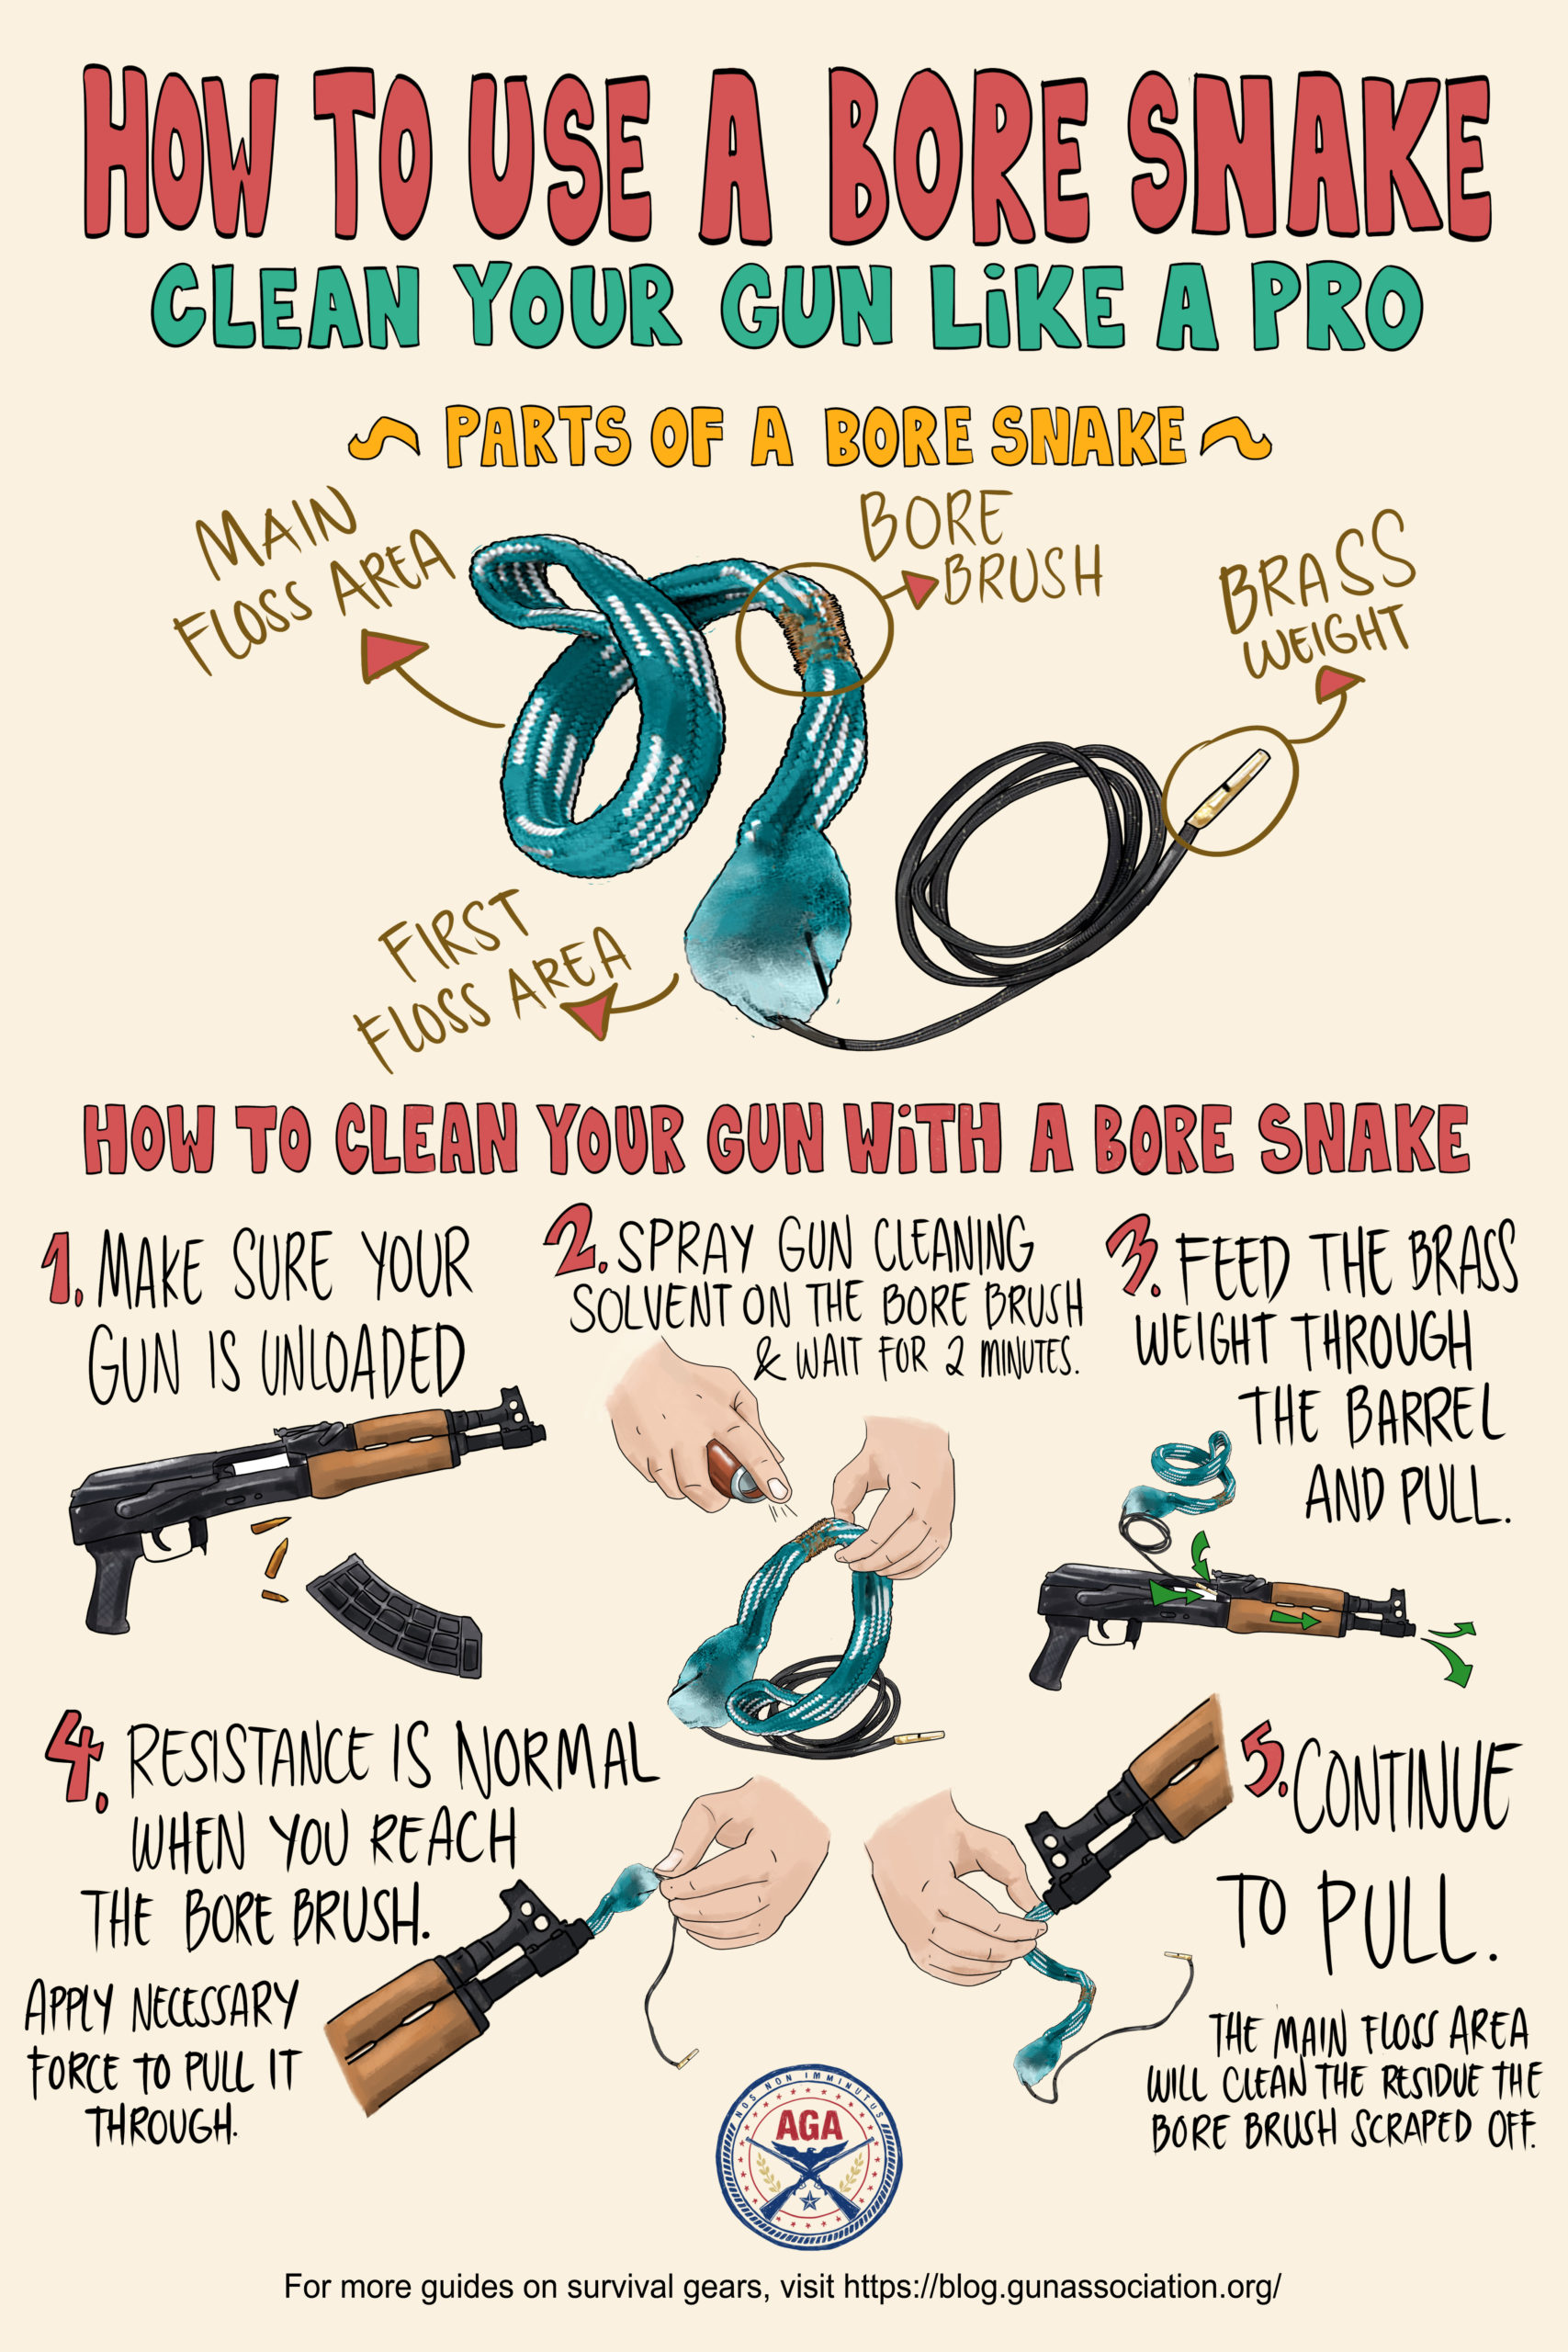 how to use a bore snake | bore snake | infographic